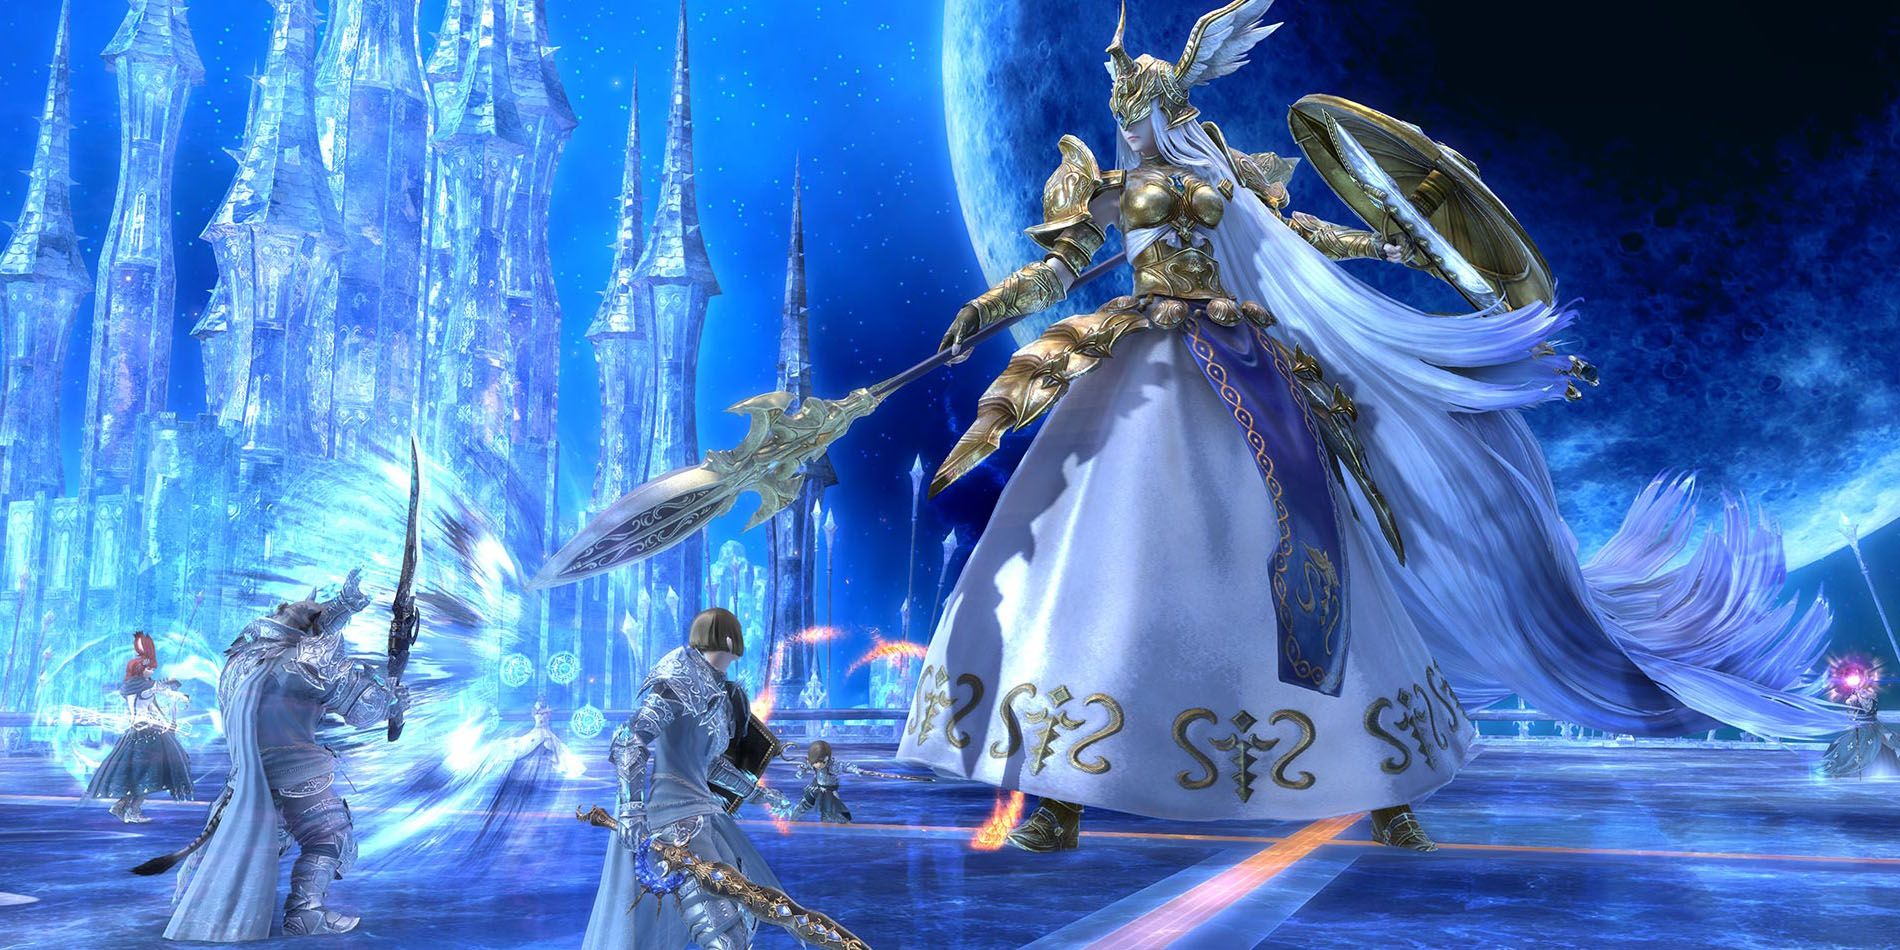 Players Fighting Halone in a Final Fantasy XIV raid